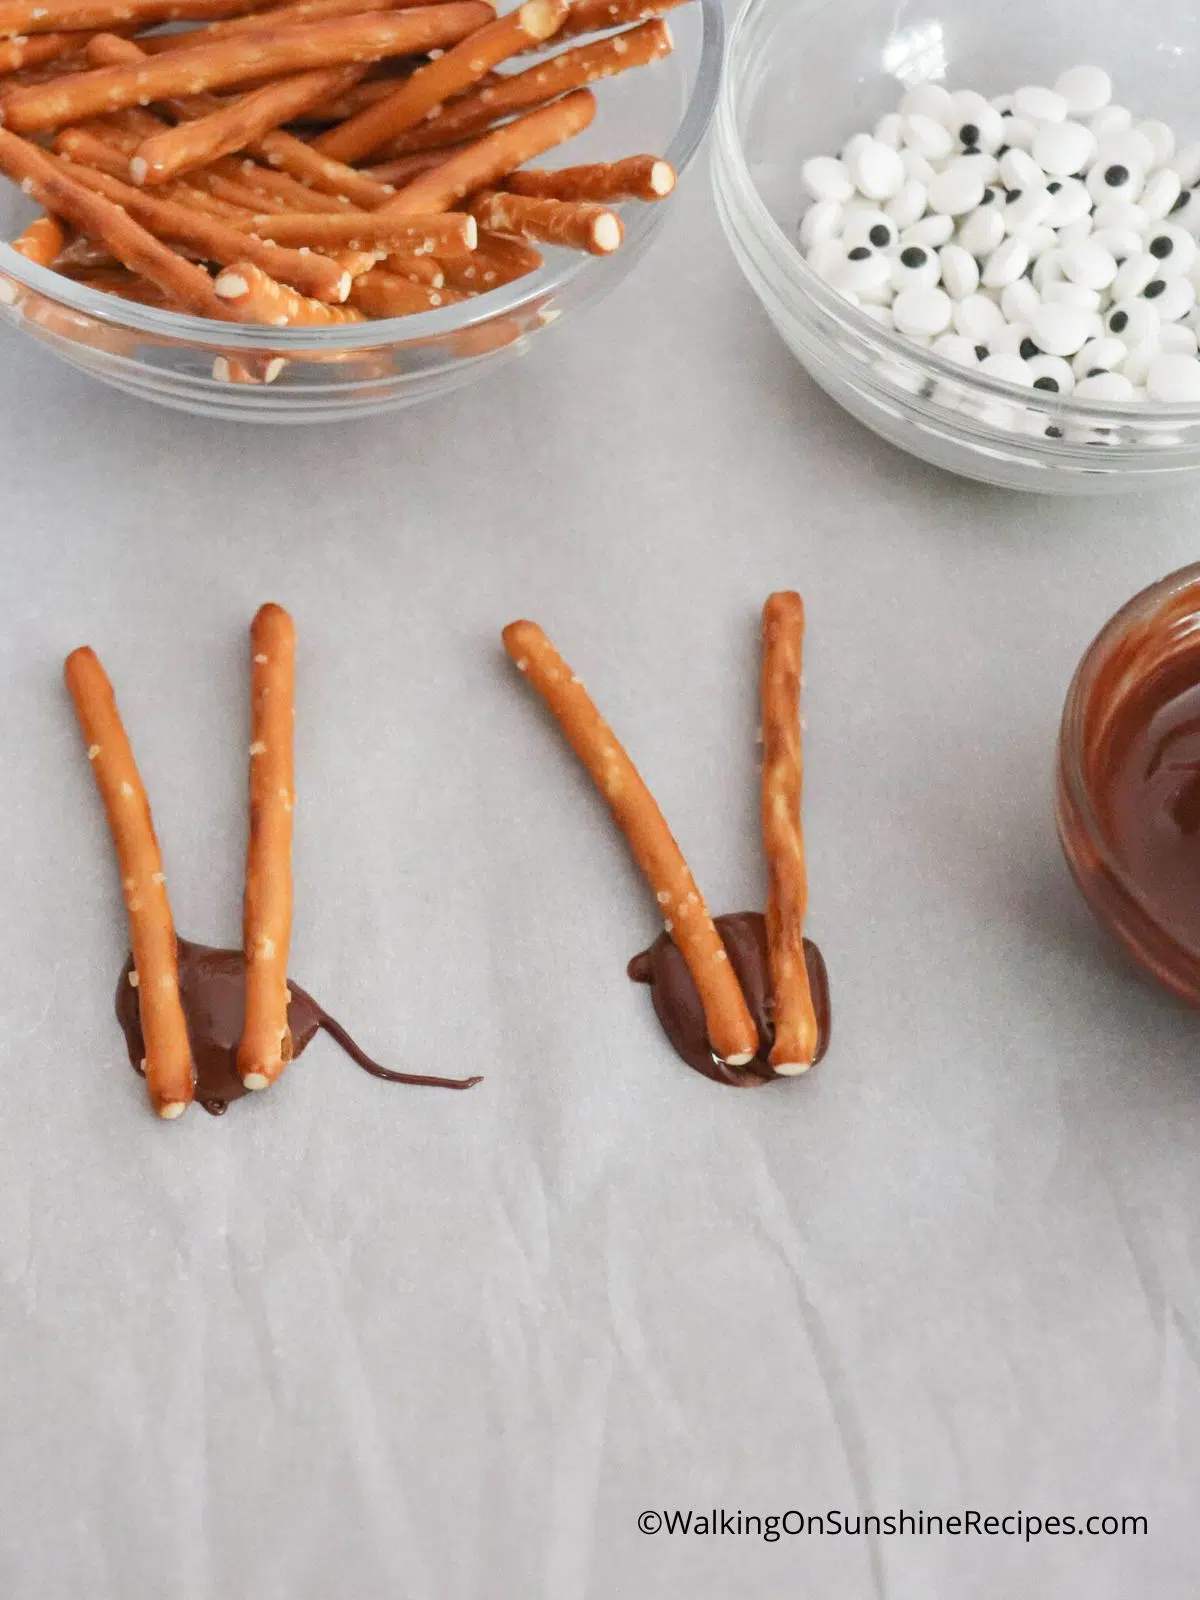 melted chocolate, pretzel sticks and candy eyes for candy reindeer treats.